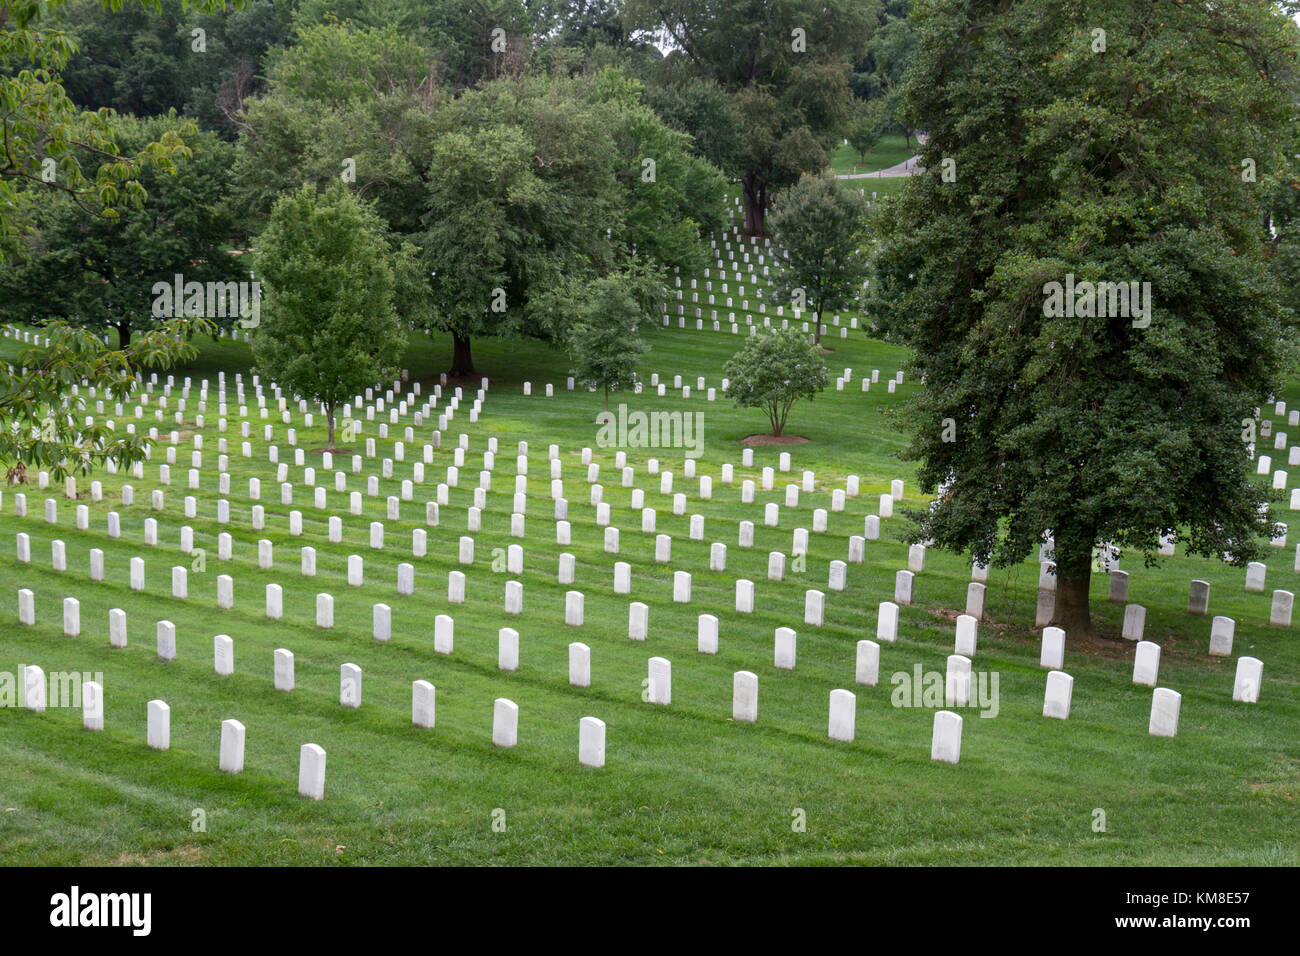 General view across headstones in the Arlington National Cemetery, Virginia, United States. Stock Photo